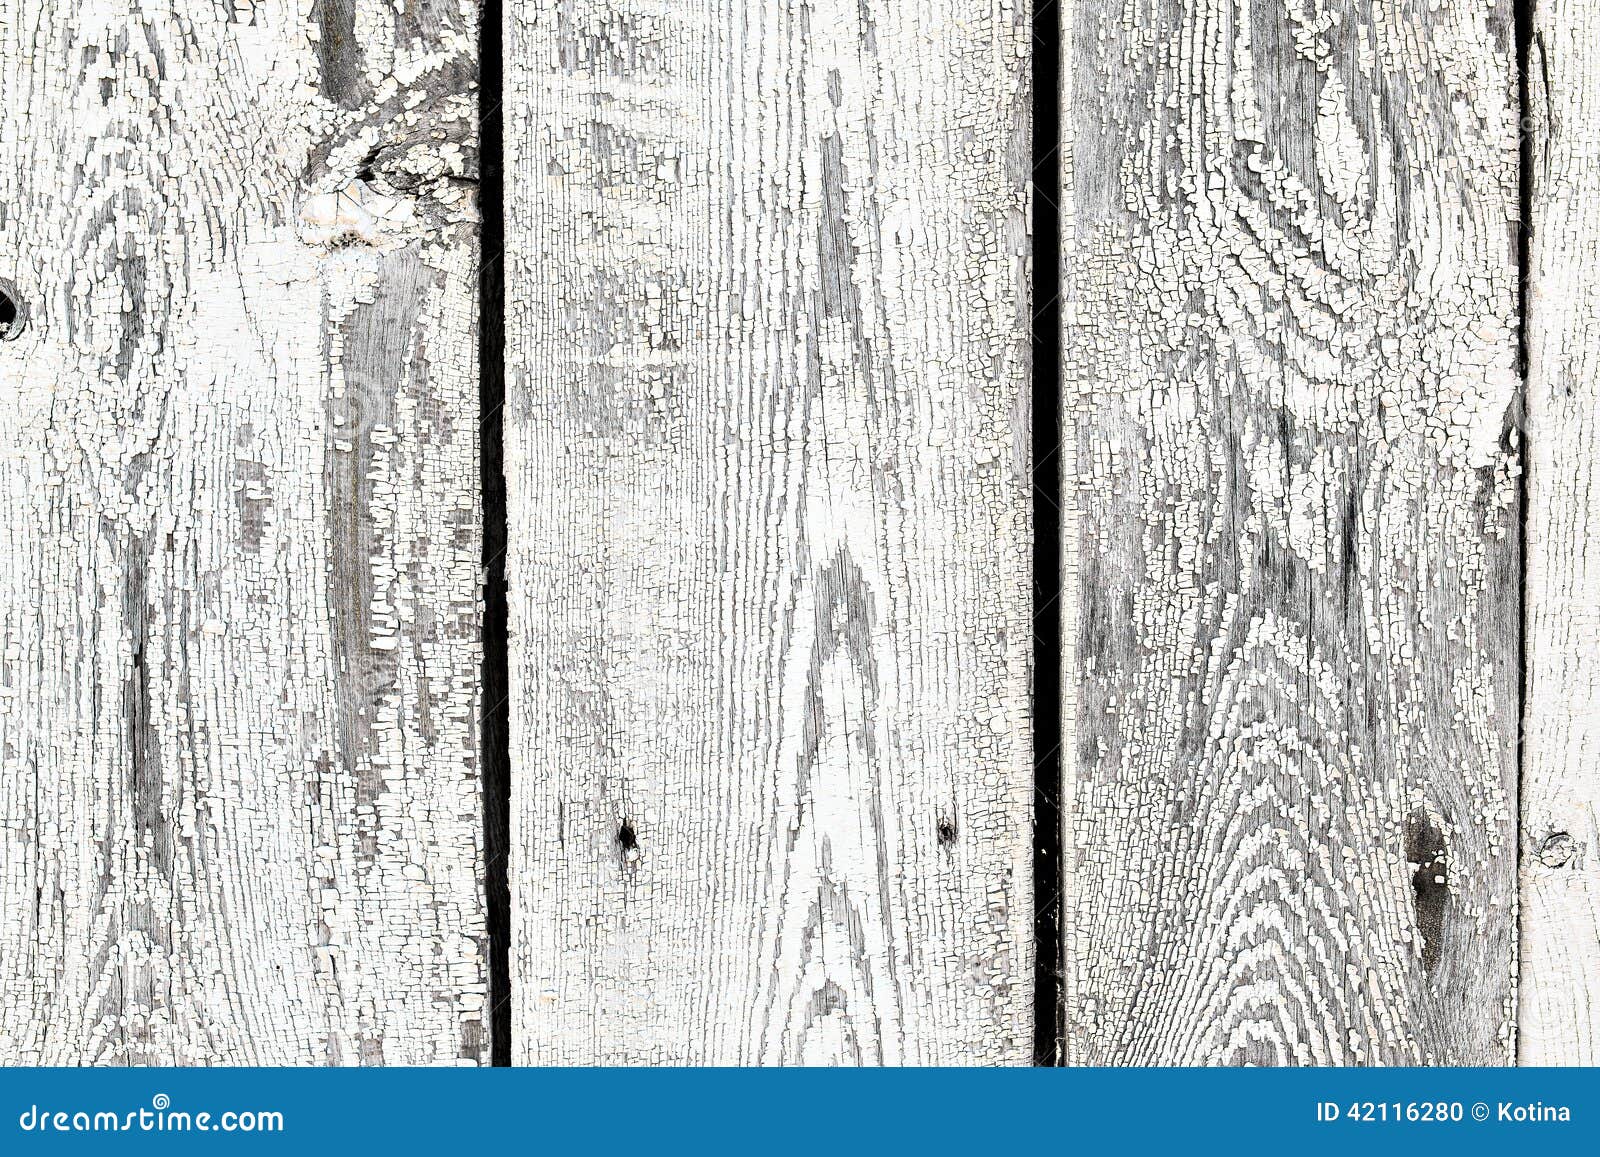  texture of old white painted wooden lining boards wall. Fence surface